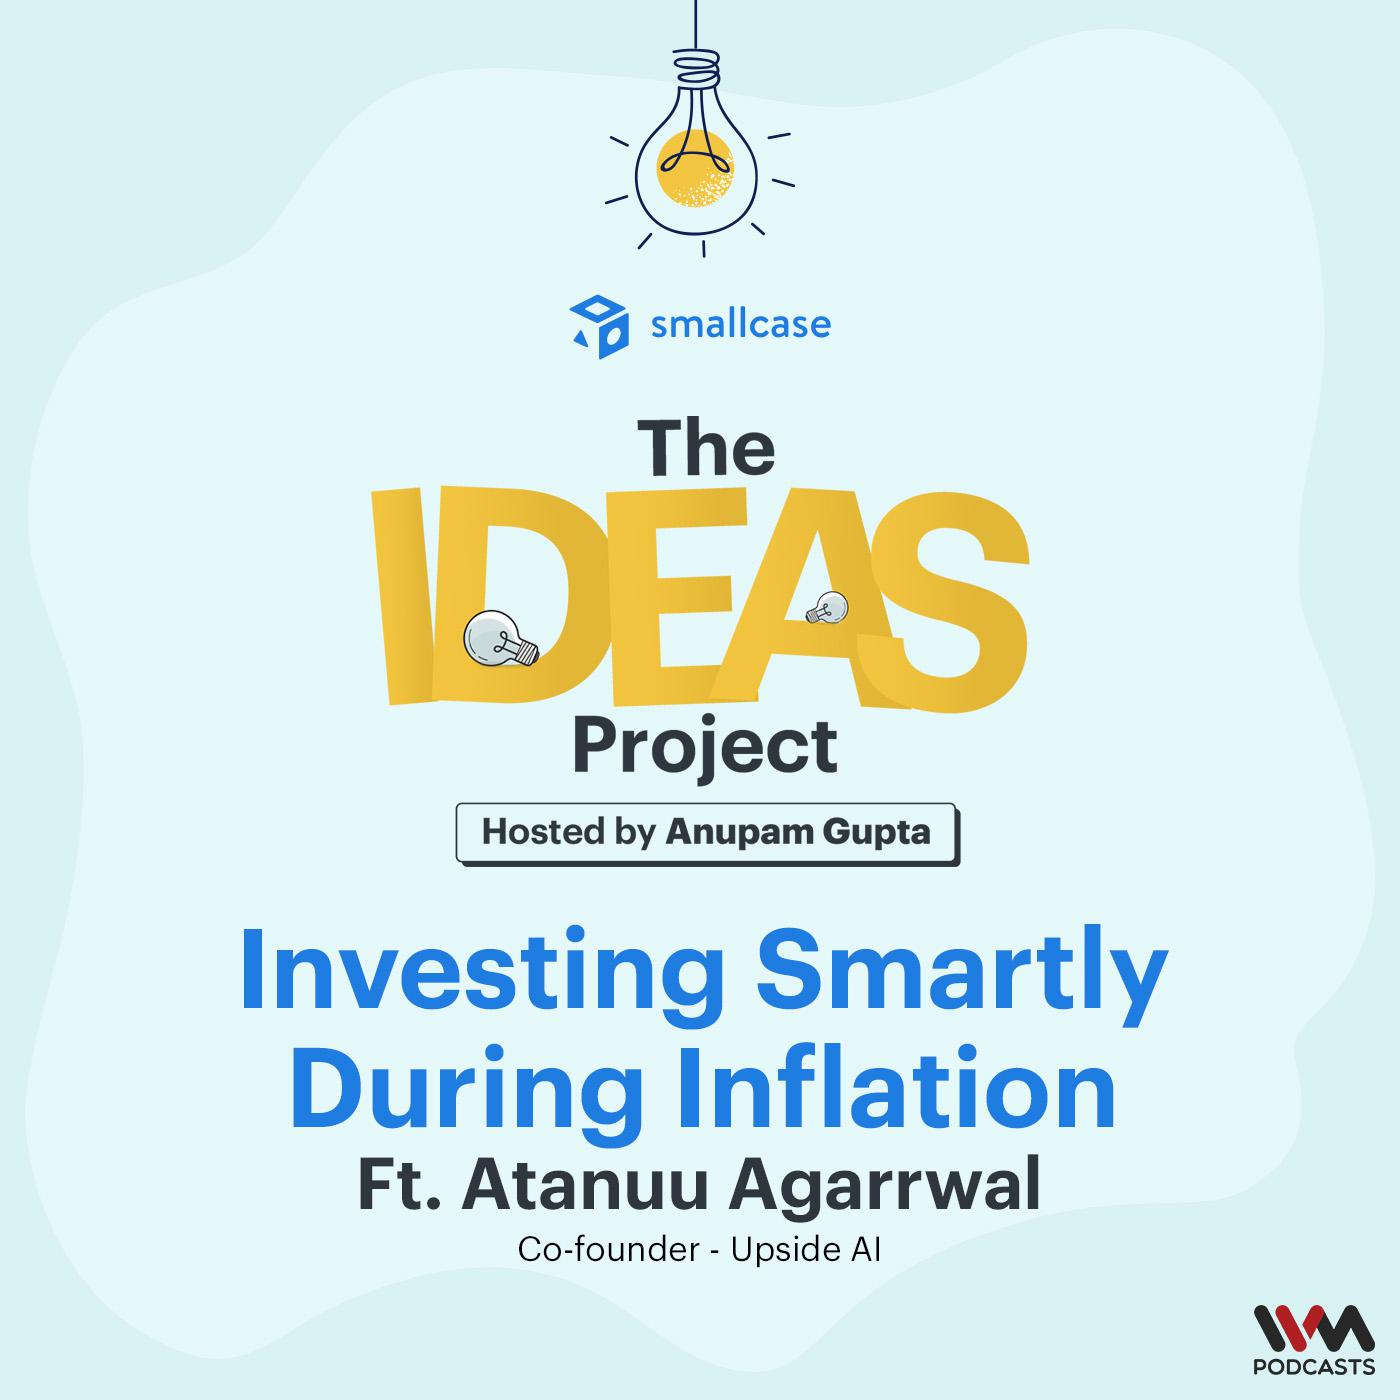 Investing Smartly During Inflation ft. Atanuu Agarrwal